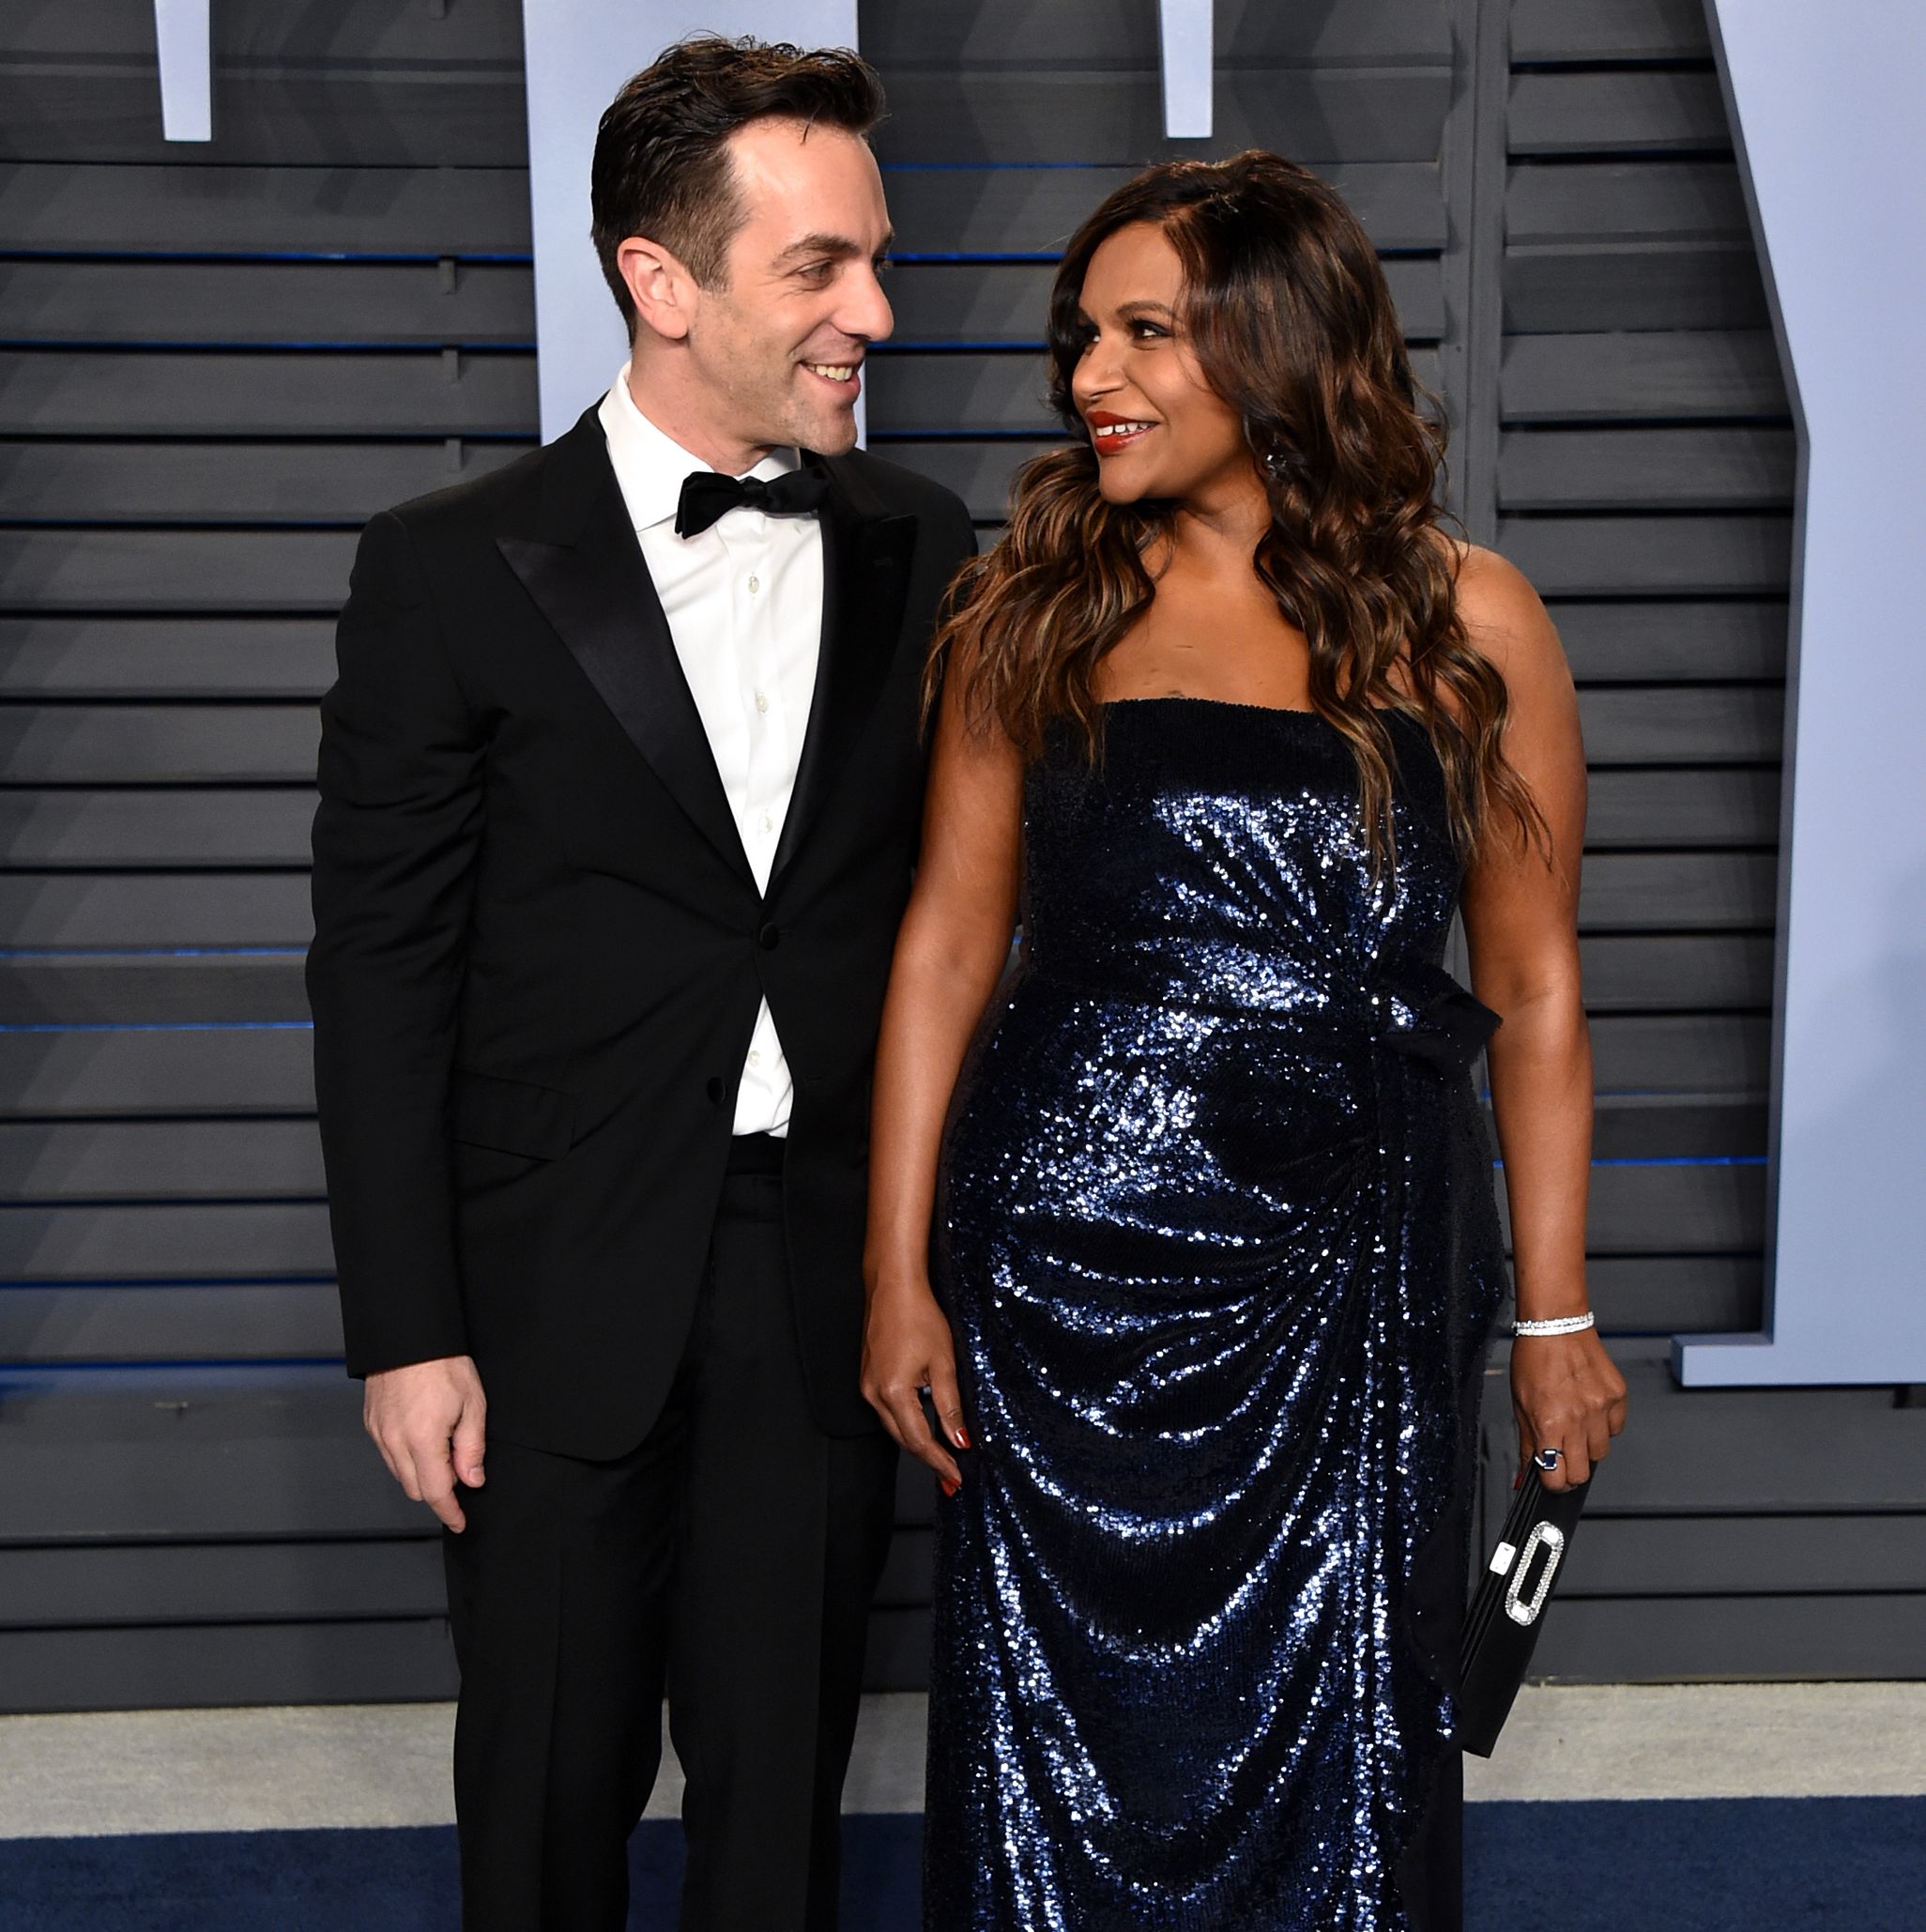 Mindy Kaling Just Responded to Those Rumors That B.J. Novak Is Her Children's Father